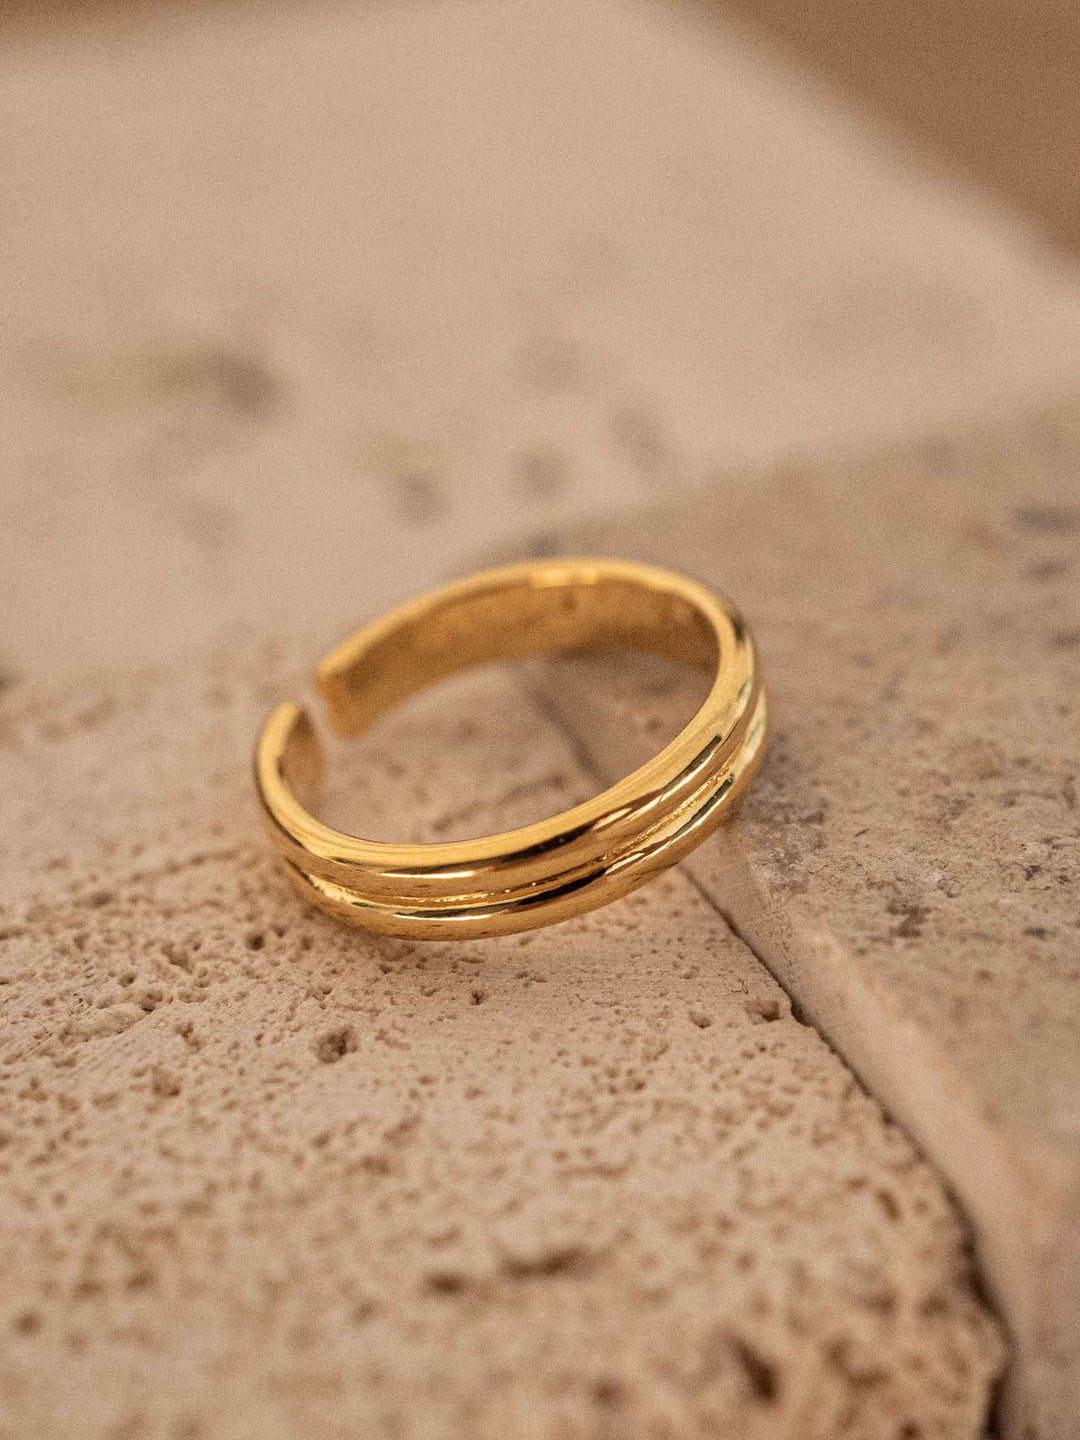 A double round gold-colored ring